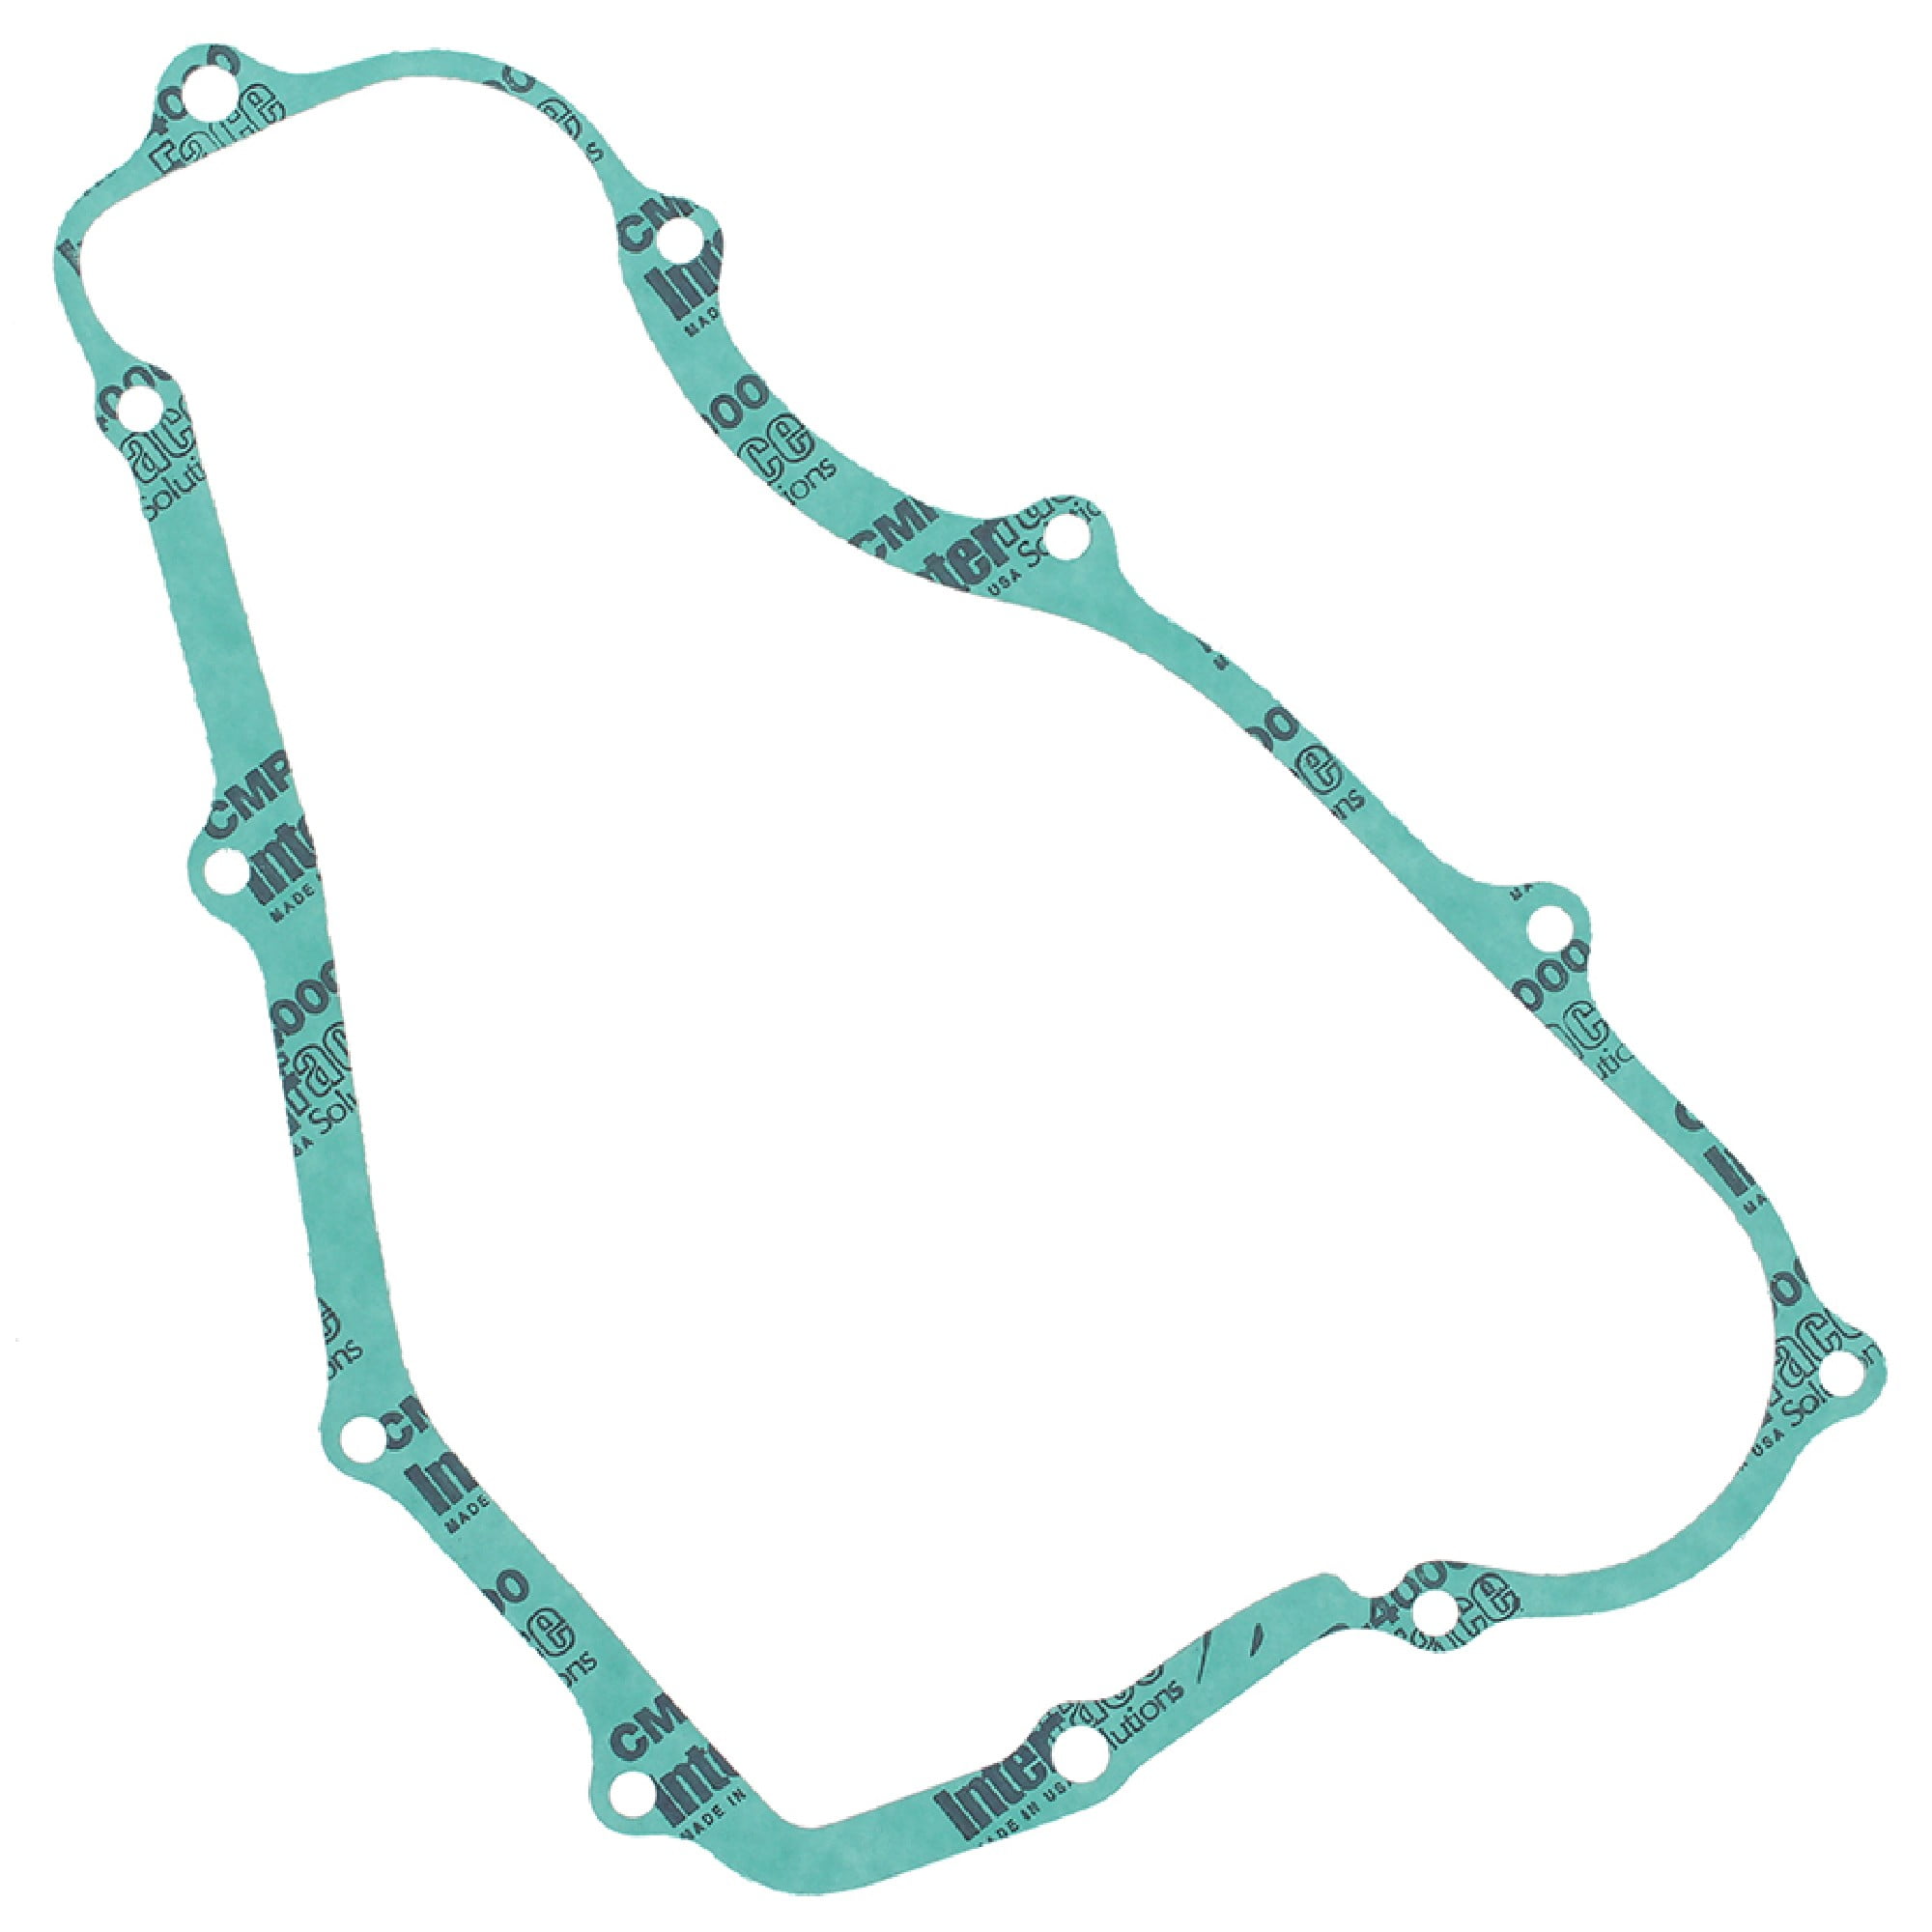 Clutch Cover Gasket for Honda CR